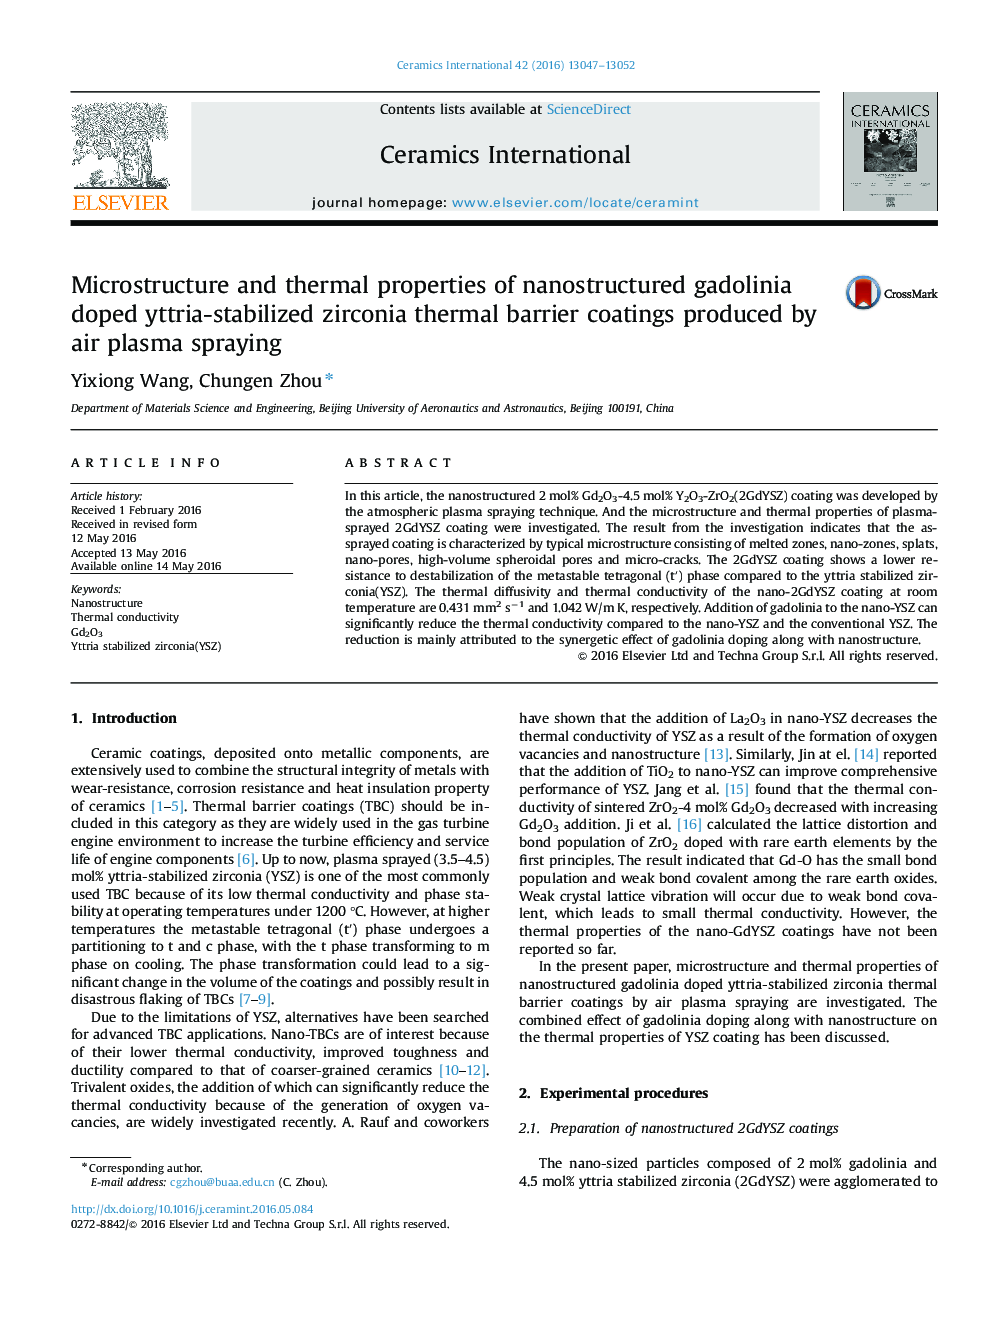 Microstructure and thermal properties of nanostructured gadolinia doped yttria-stabilized zirconia thermal barrier coatings produced by air plasma spraying